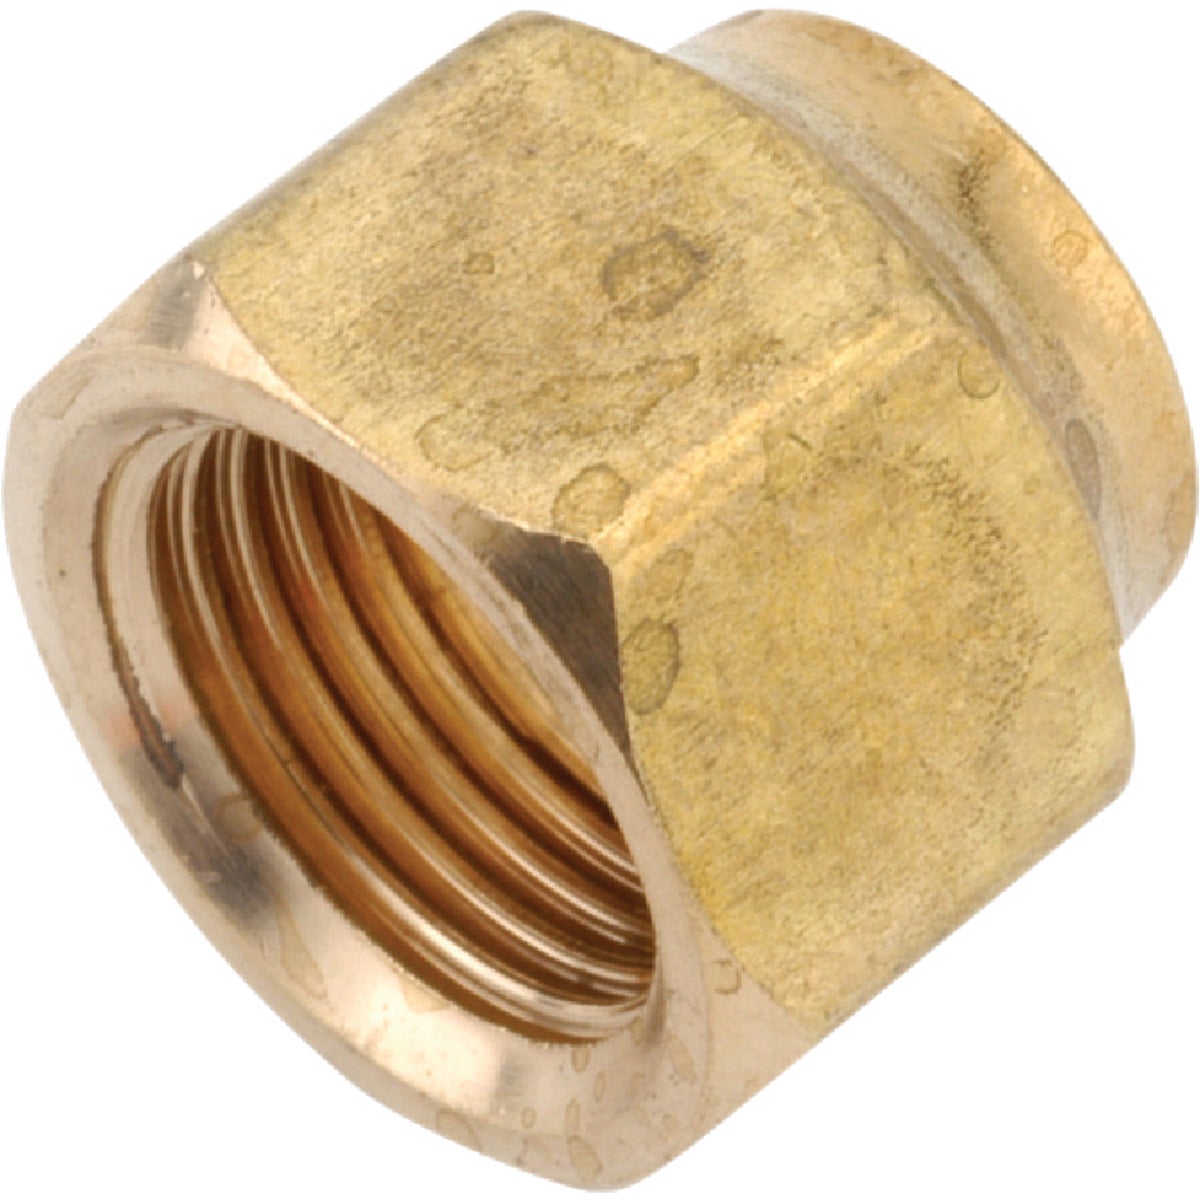 Anderson Metals 754018-04 Anderson Metals 1/4 In. Brass Forged Short Flare Nut 754018-04 Pack of 10